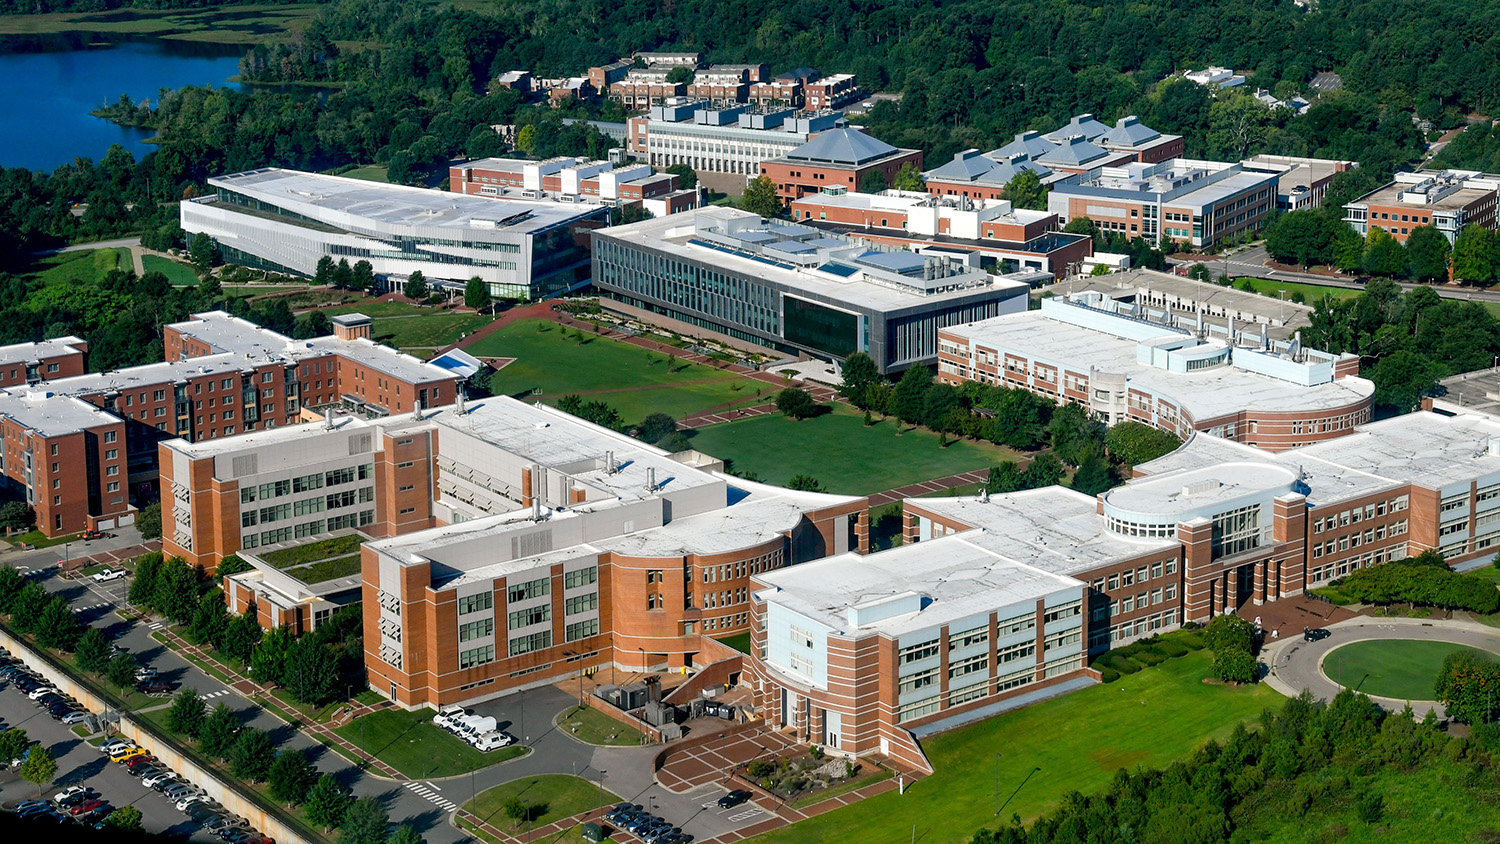 Aerial view of the College of Engineering and the Oval.